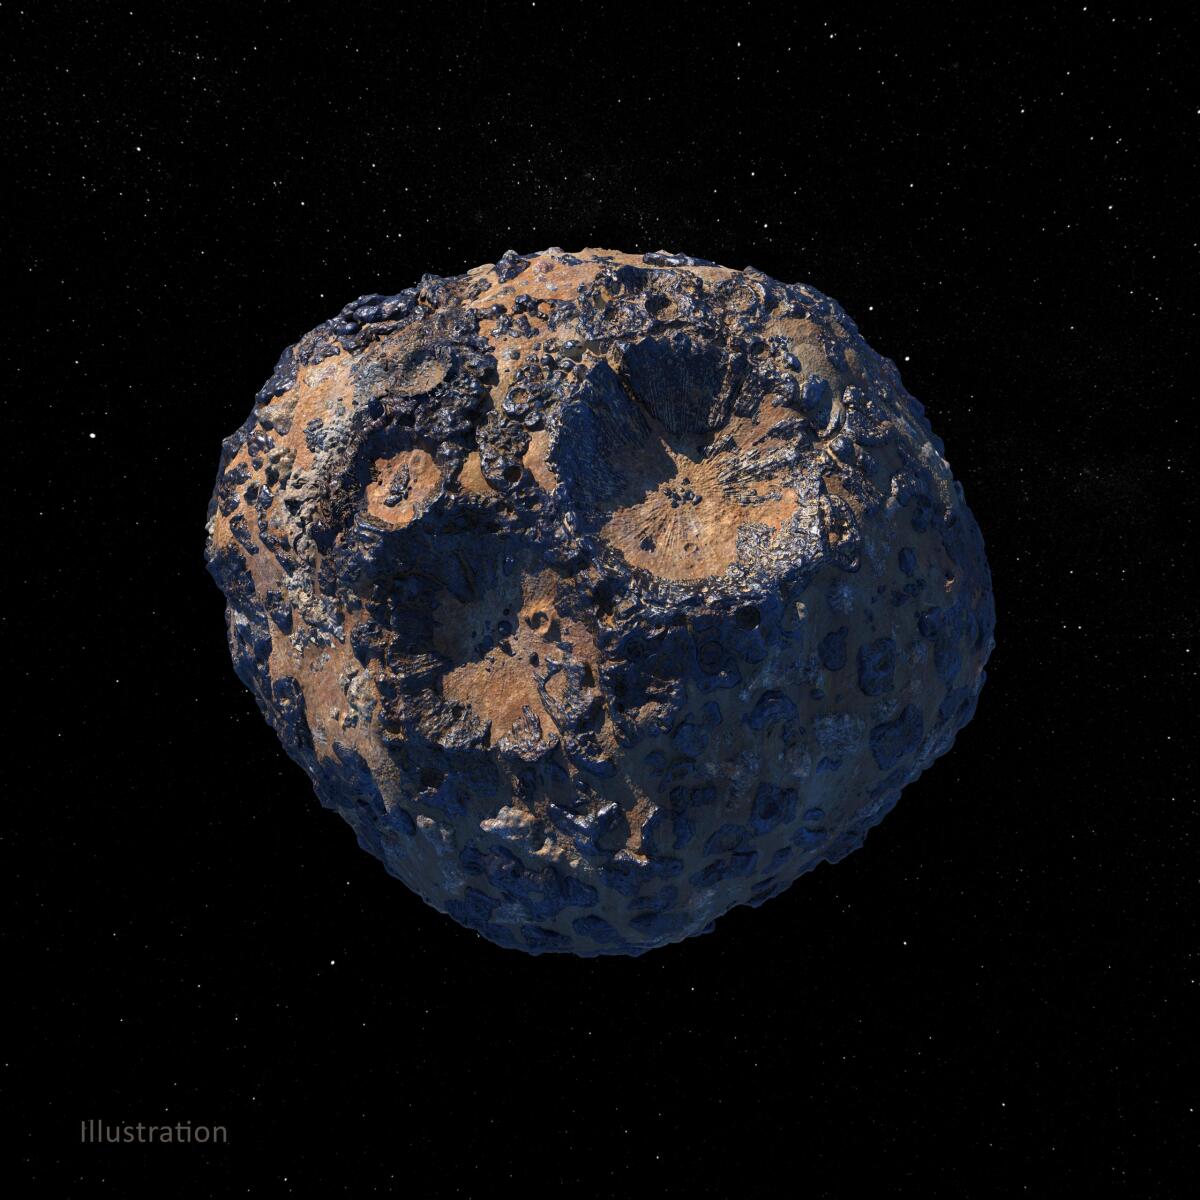 An illustration depicting a black potato-like rock with craters and orange markings